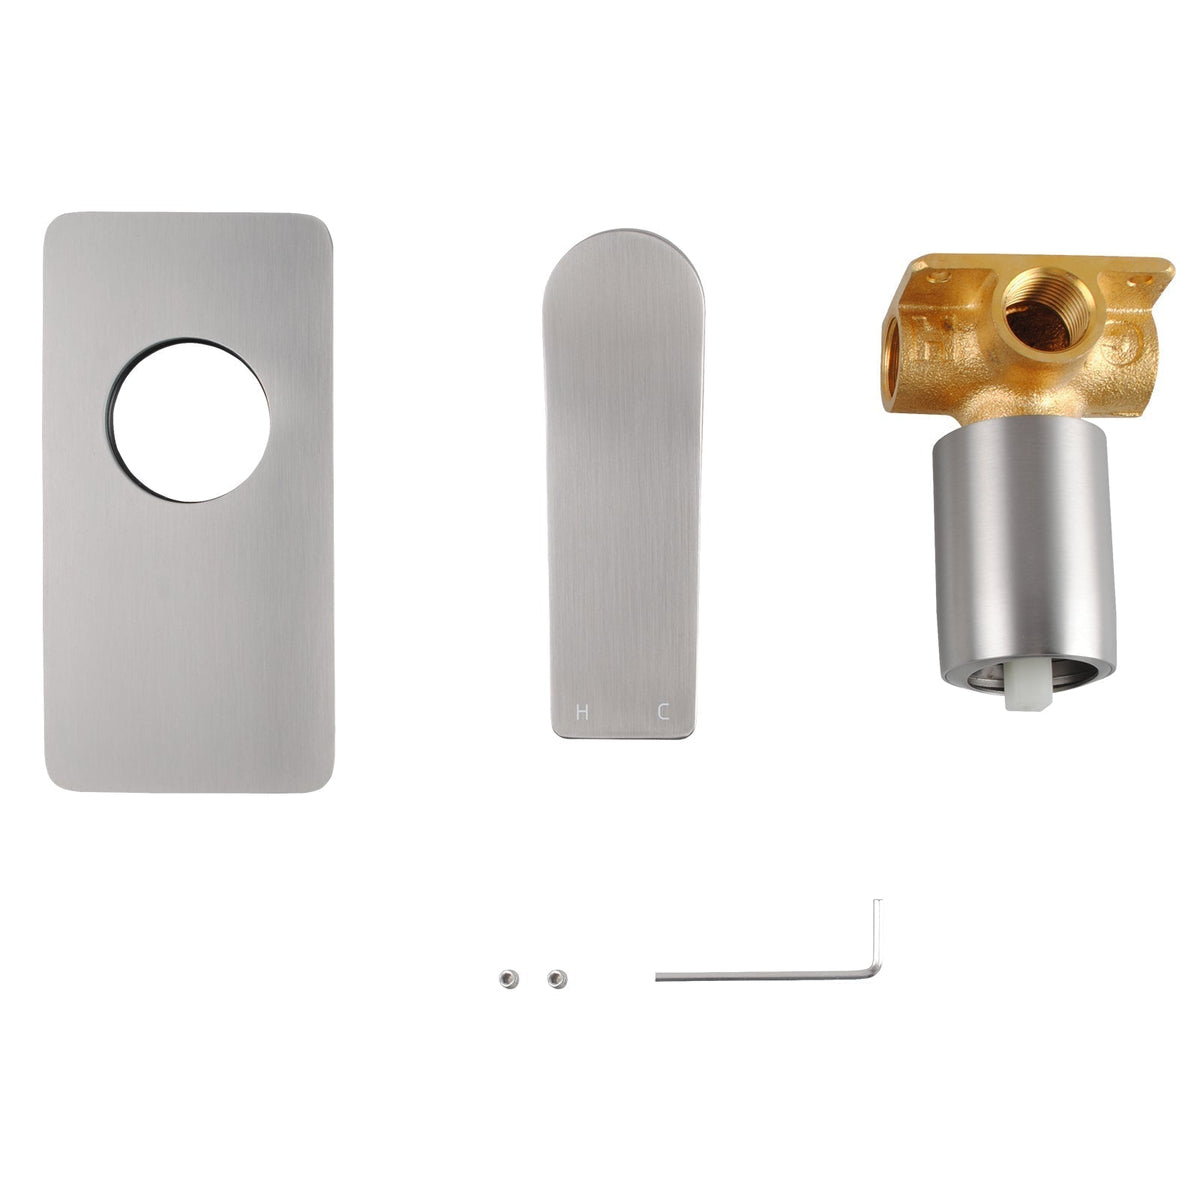 RUSHY Square Brushed Nickel Built-in Shower Mixer(Brass)